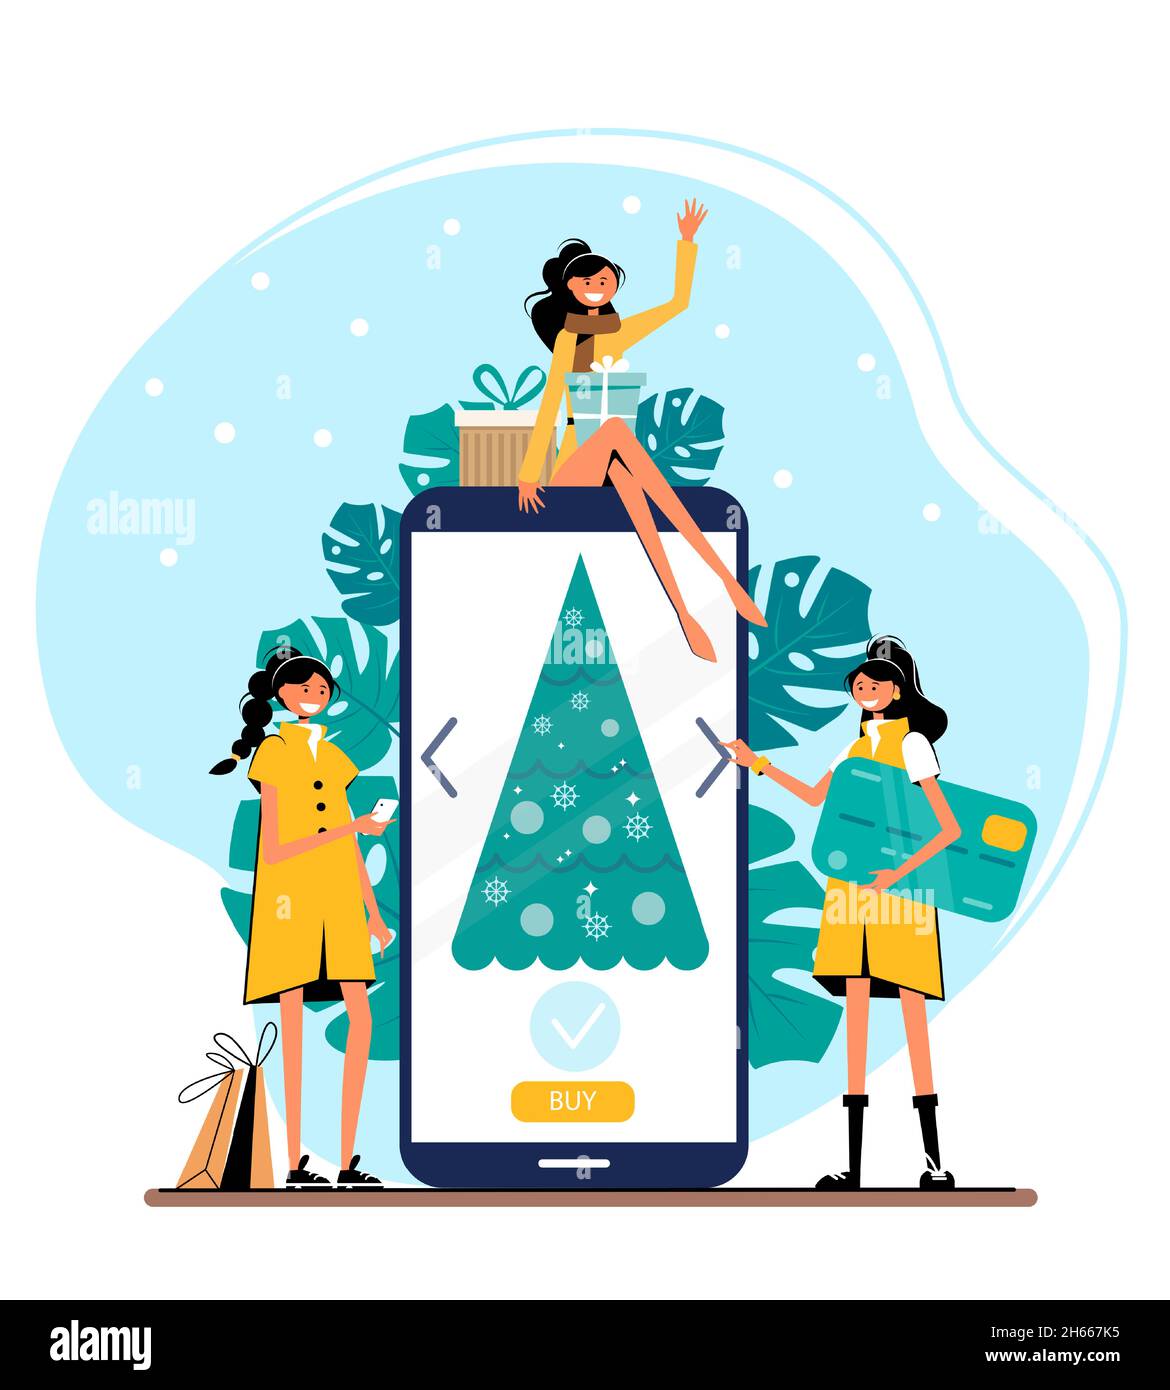 Business series, Christmas online shop - modern flat vector illustration concept of women shopping. Website interaction - purchase process. Stock Vector